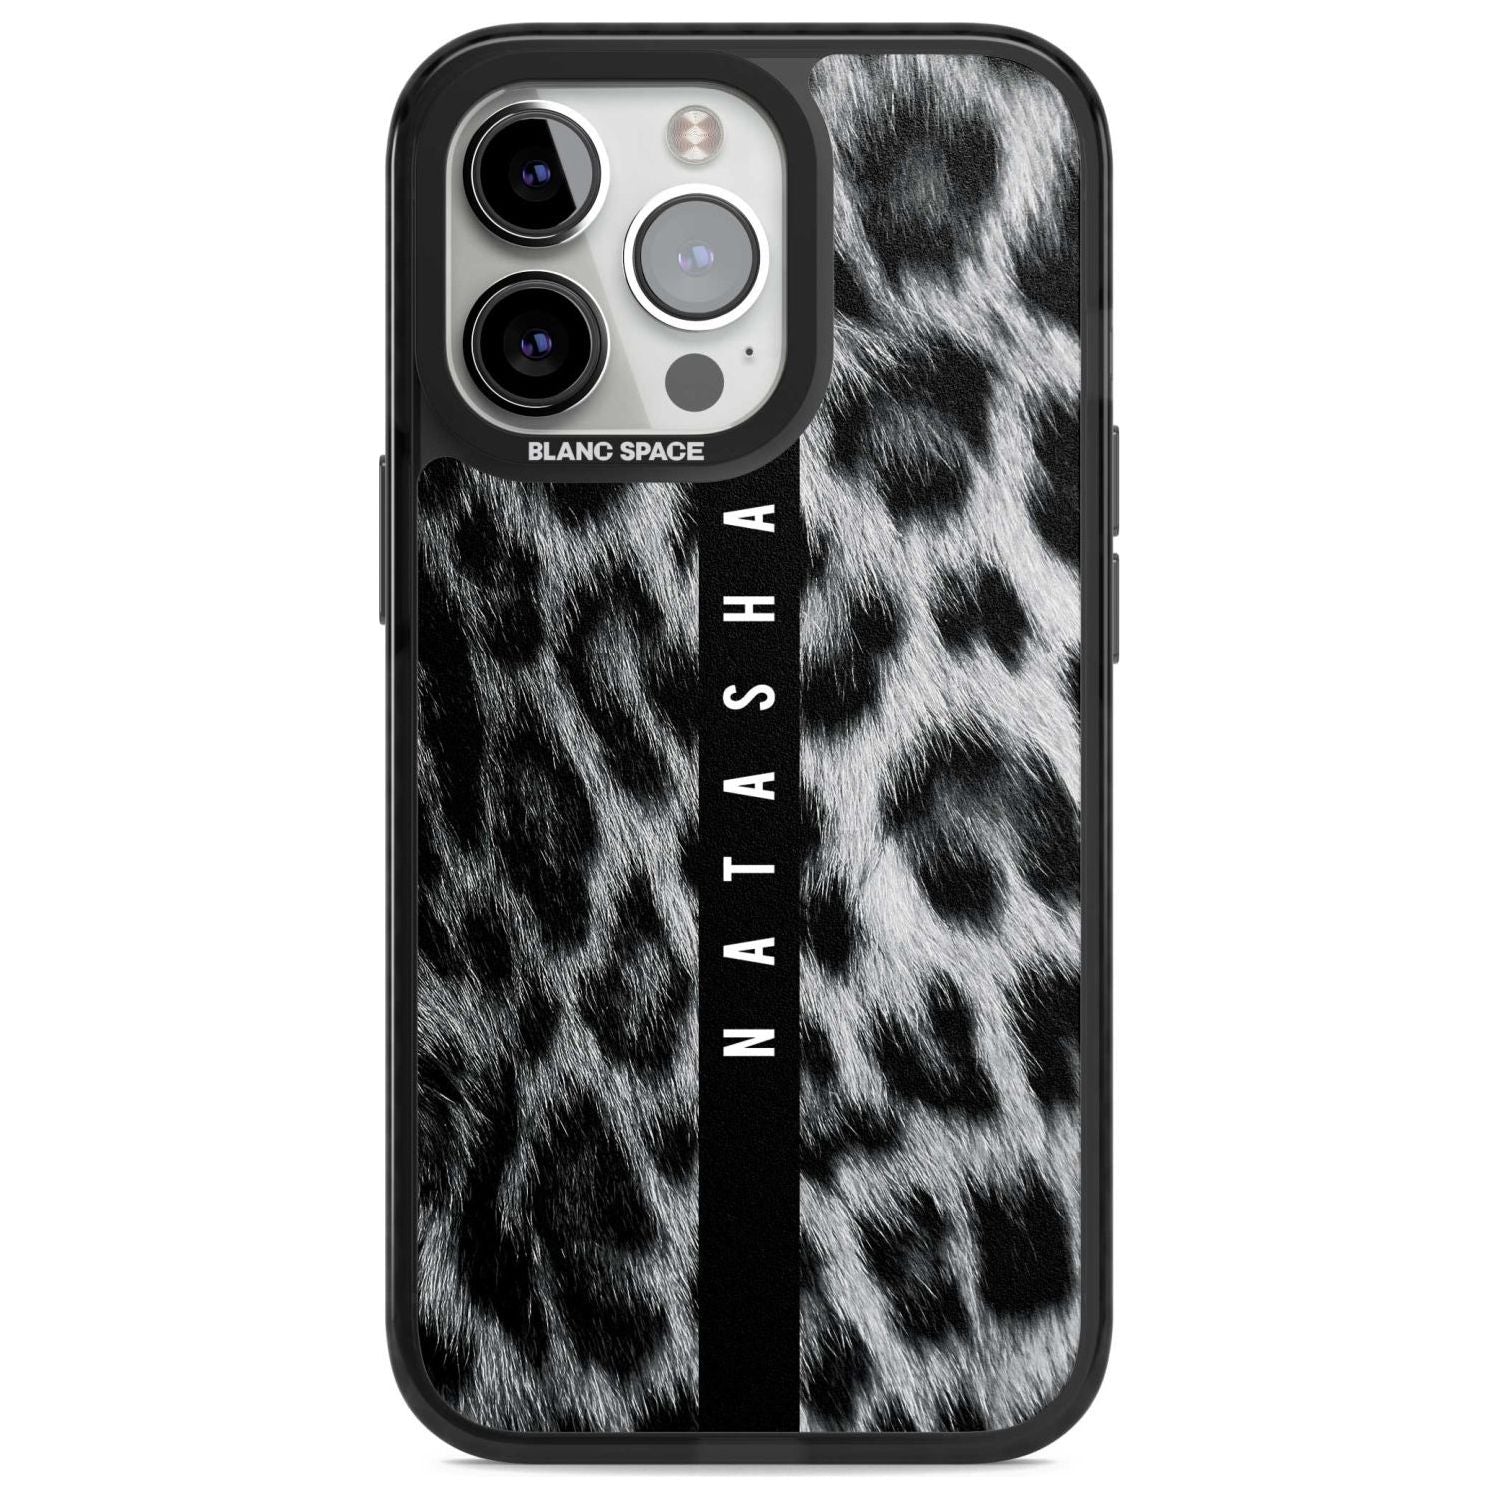 Personalised Snow Leopard Print Custom Phone Case iPhone 15 Pro Max / Magsafe Black Impact Case,iPhone 15 Pro / Magsafe Black Impact Case,iPhone 14 Pro Max / Magsafe Black Impact Case,iPhone 14 Pro / Magsafe Black Impact Case,iPhone 13 Pro / Magsafe Black Impact Case Blanc Space